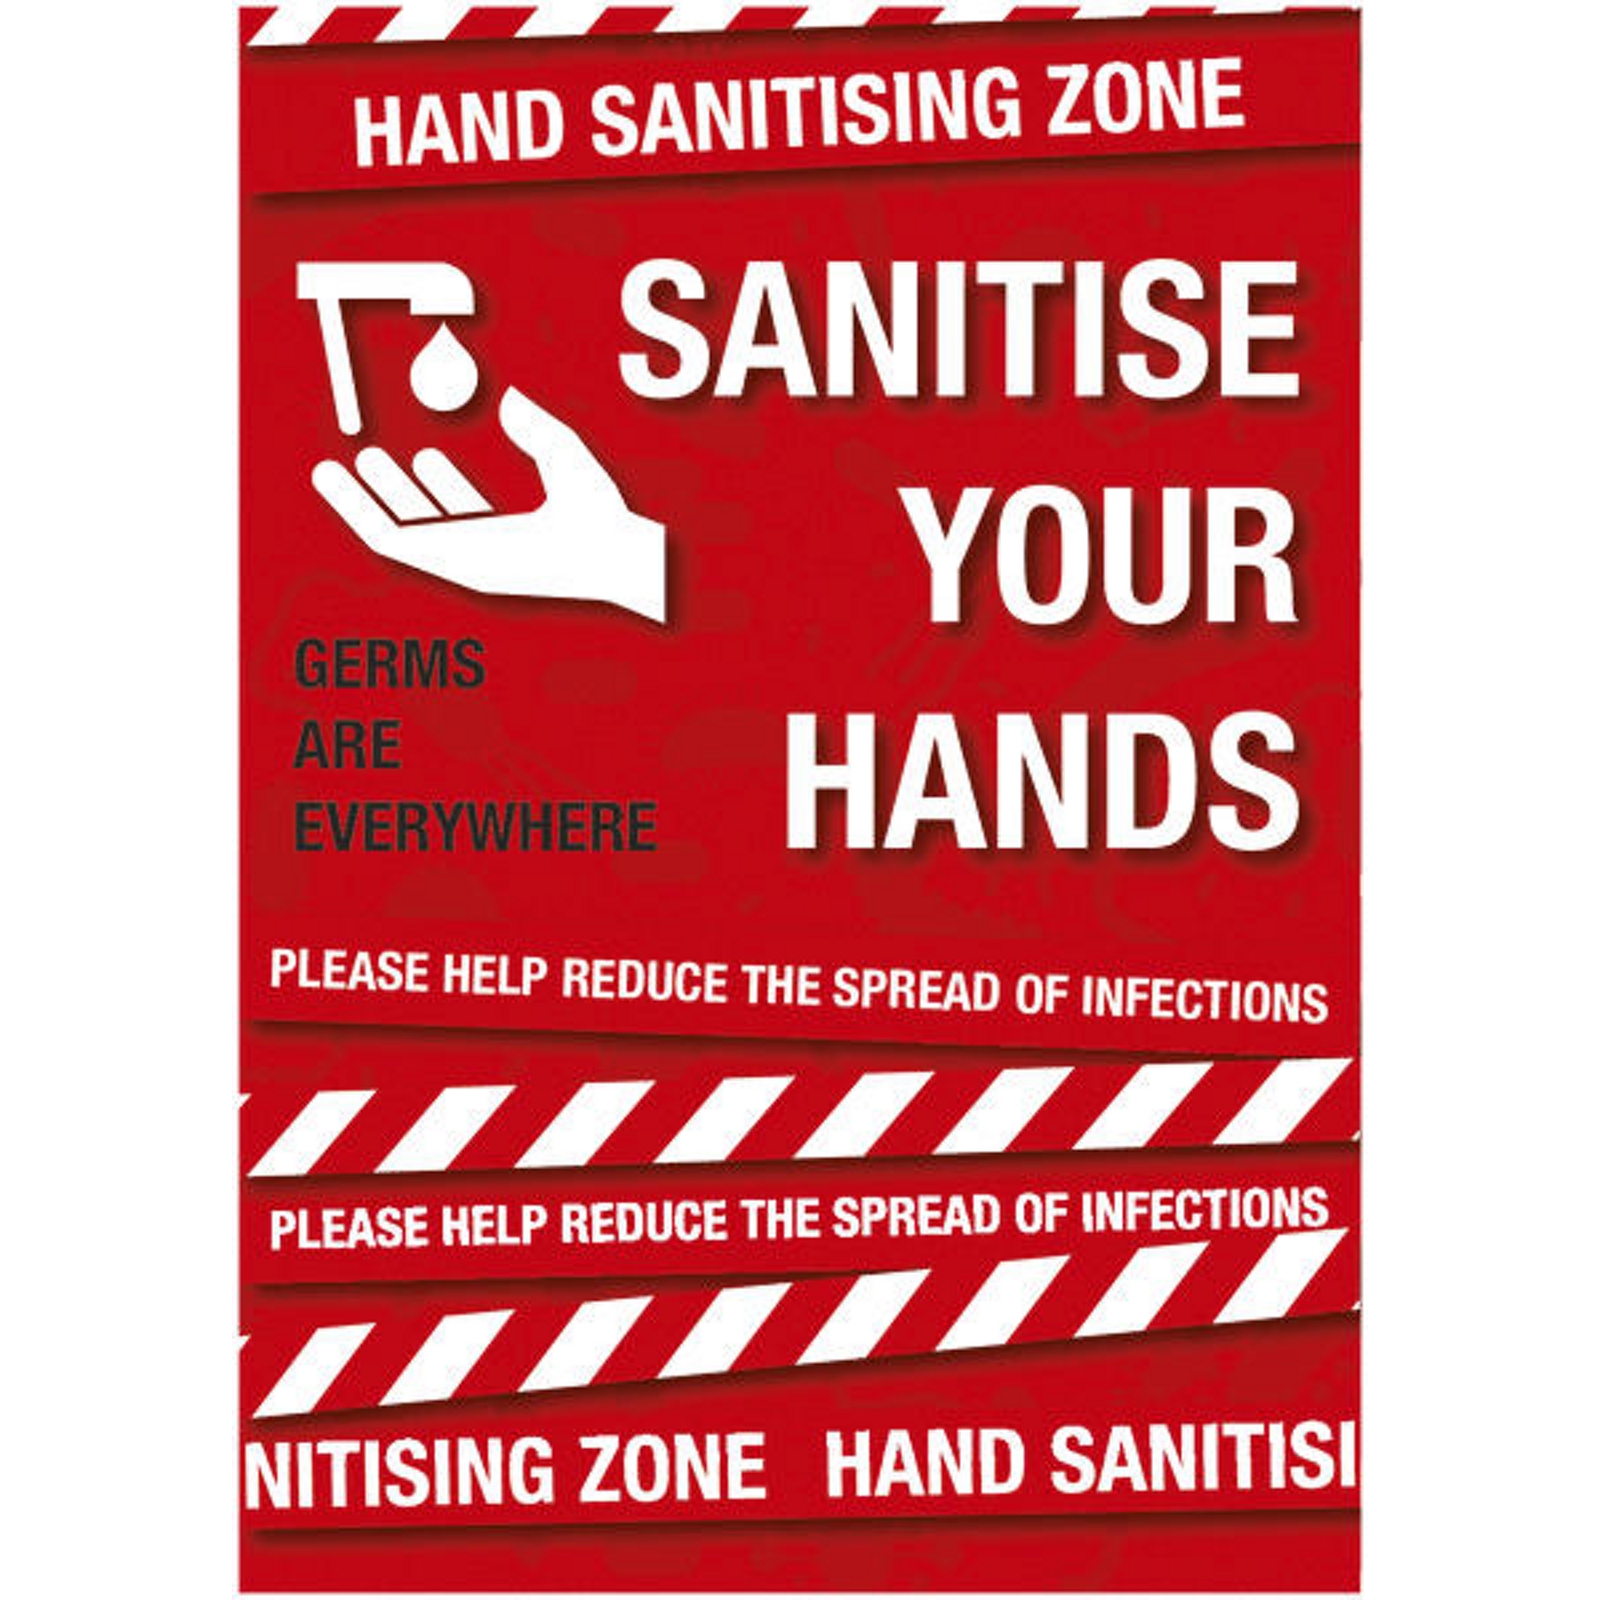 Sanitise Your Hands A3 S A Poster